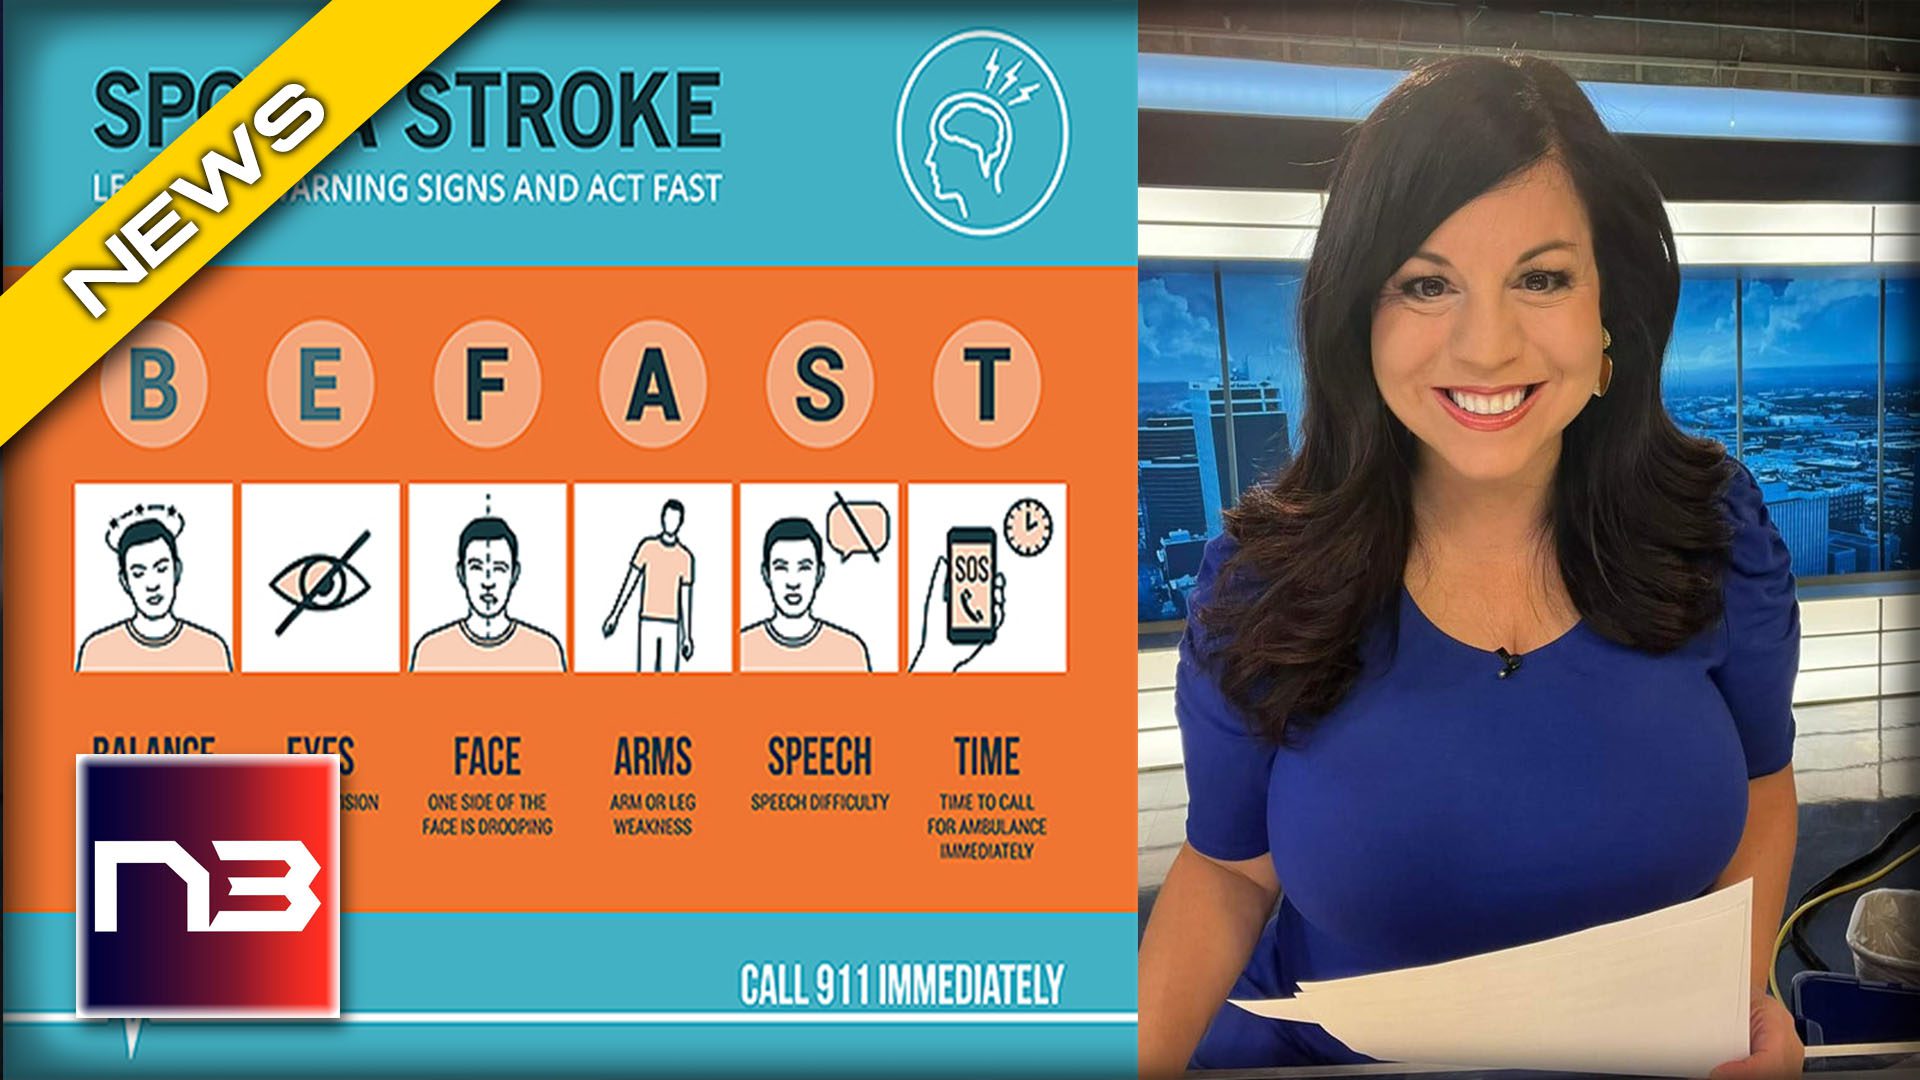 Cameras Capture The Moment A Newscaster Has A Stroke LIVE on the Air - Know the Signs